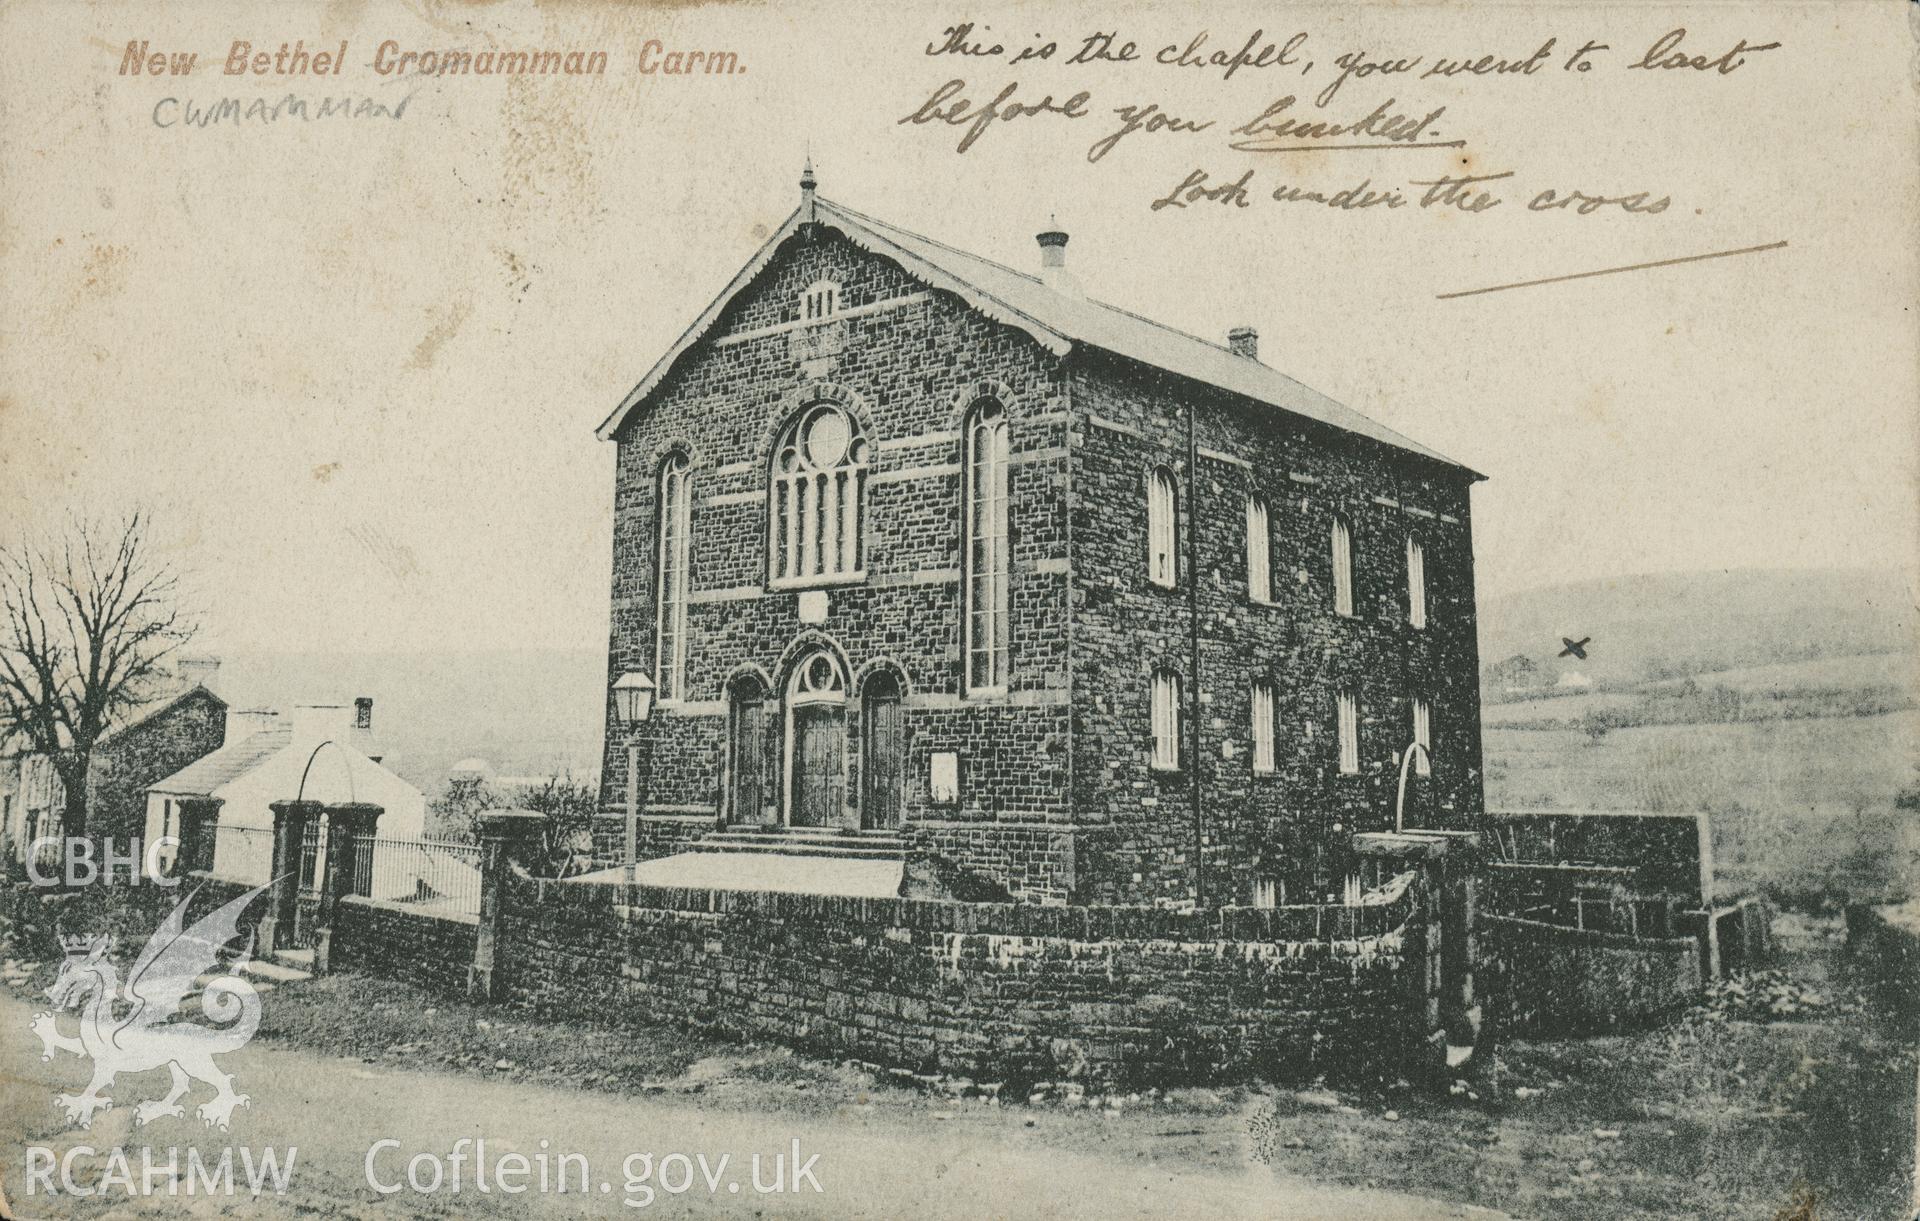 Digital copy of black and white postcard showing exterior view of New Bethel Welsh Independent Chapel, Glanamman, Cwmamman. Appears to have been franked in 1917. Postcard loaned for copying by Thomas Lloyd.